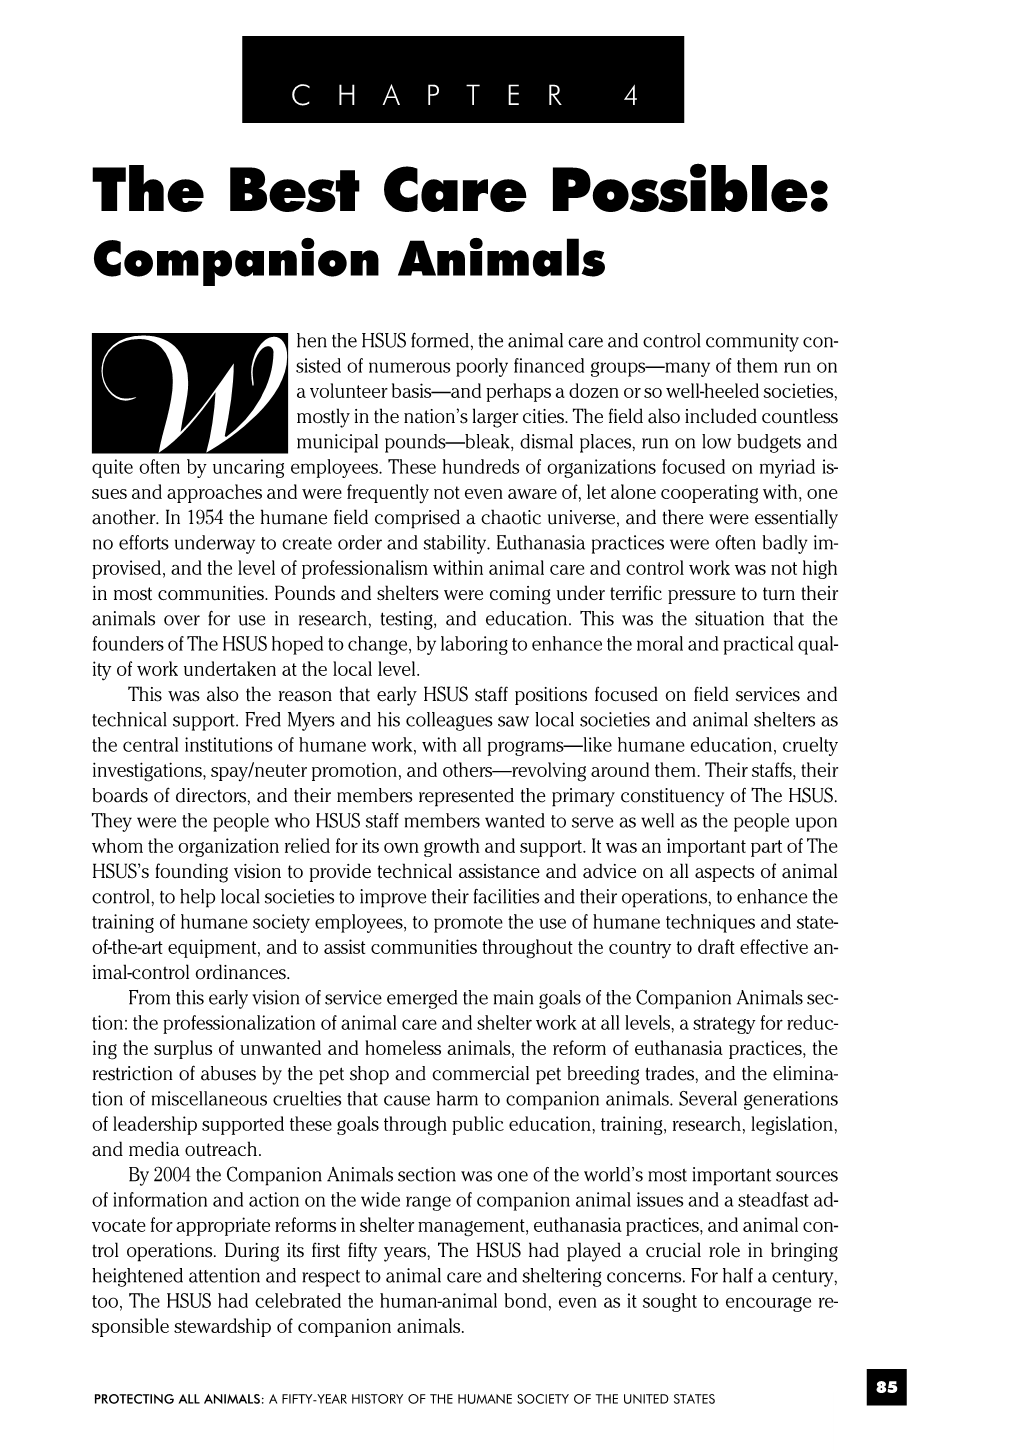 The Best Care Possible: Companion Animals